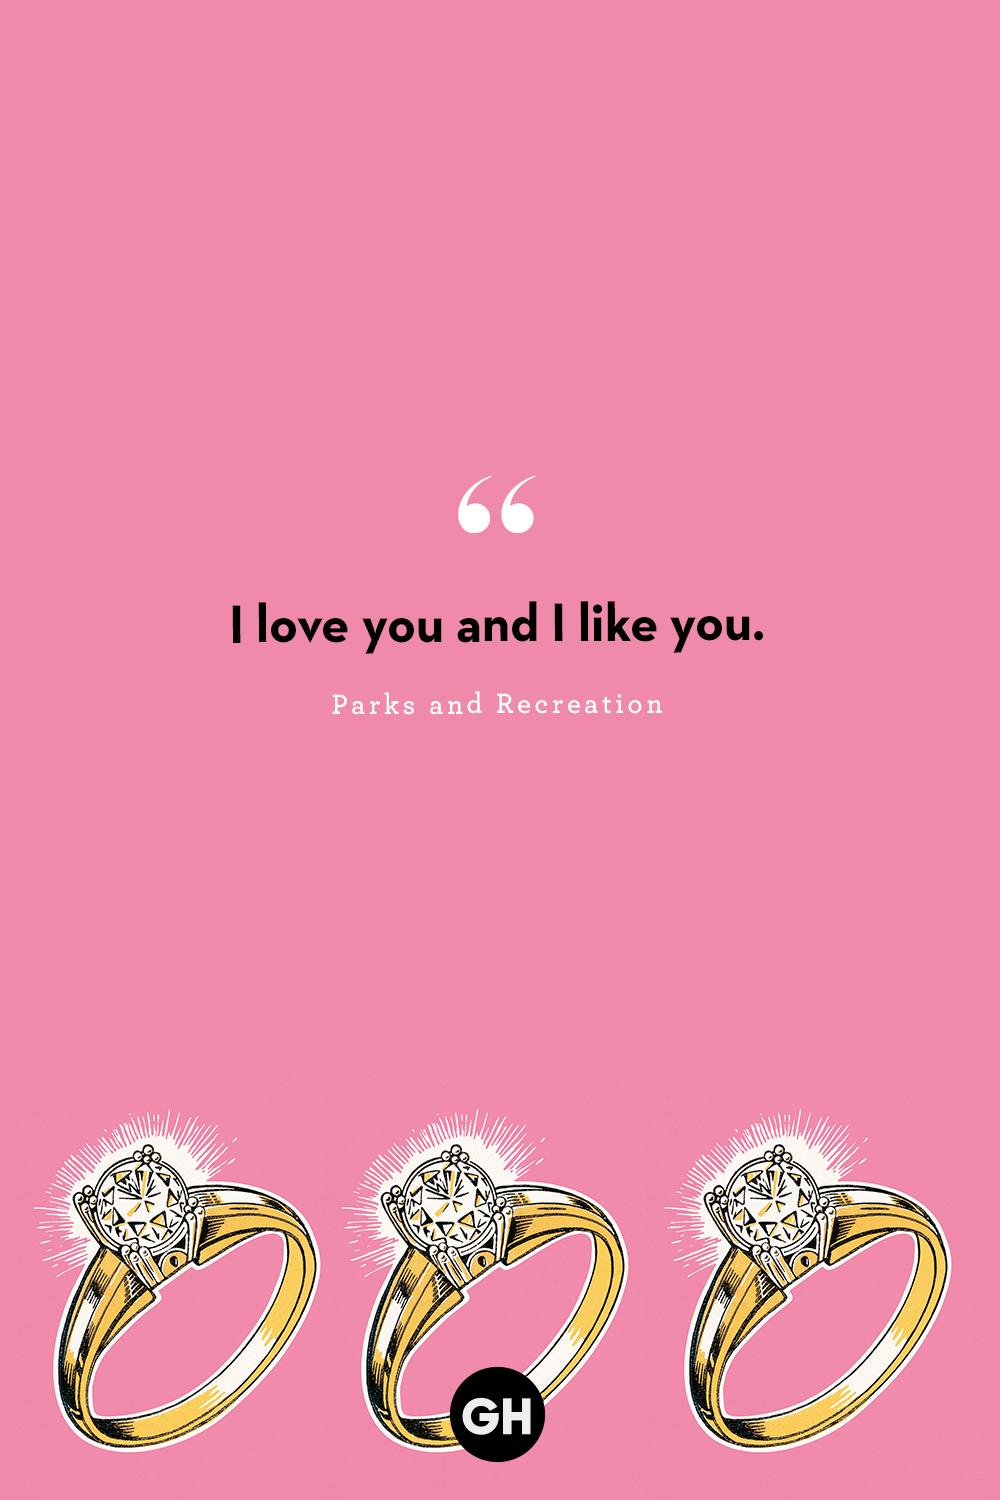 50+ Engagement Anniversary Wishes & Quotes You Must See